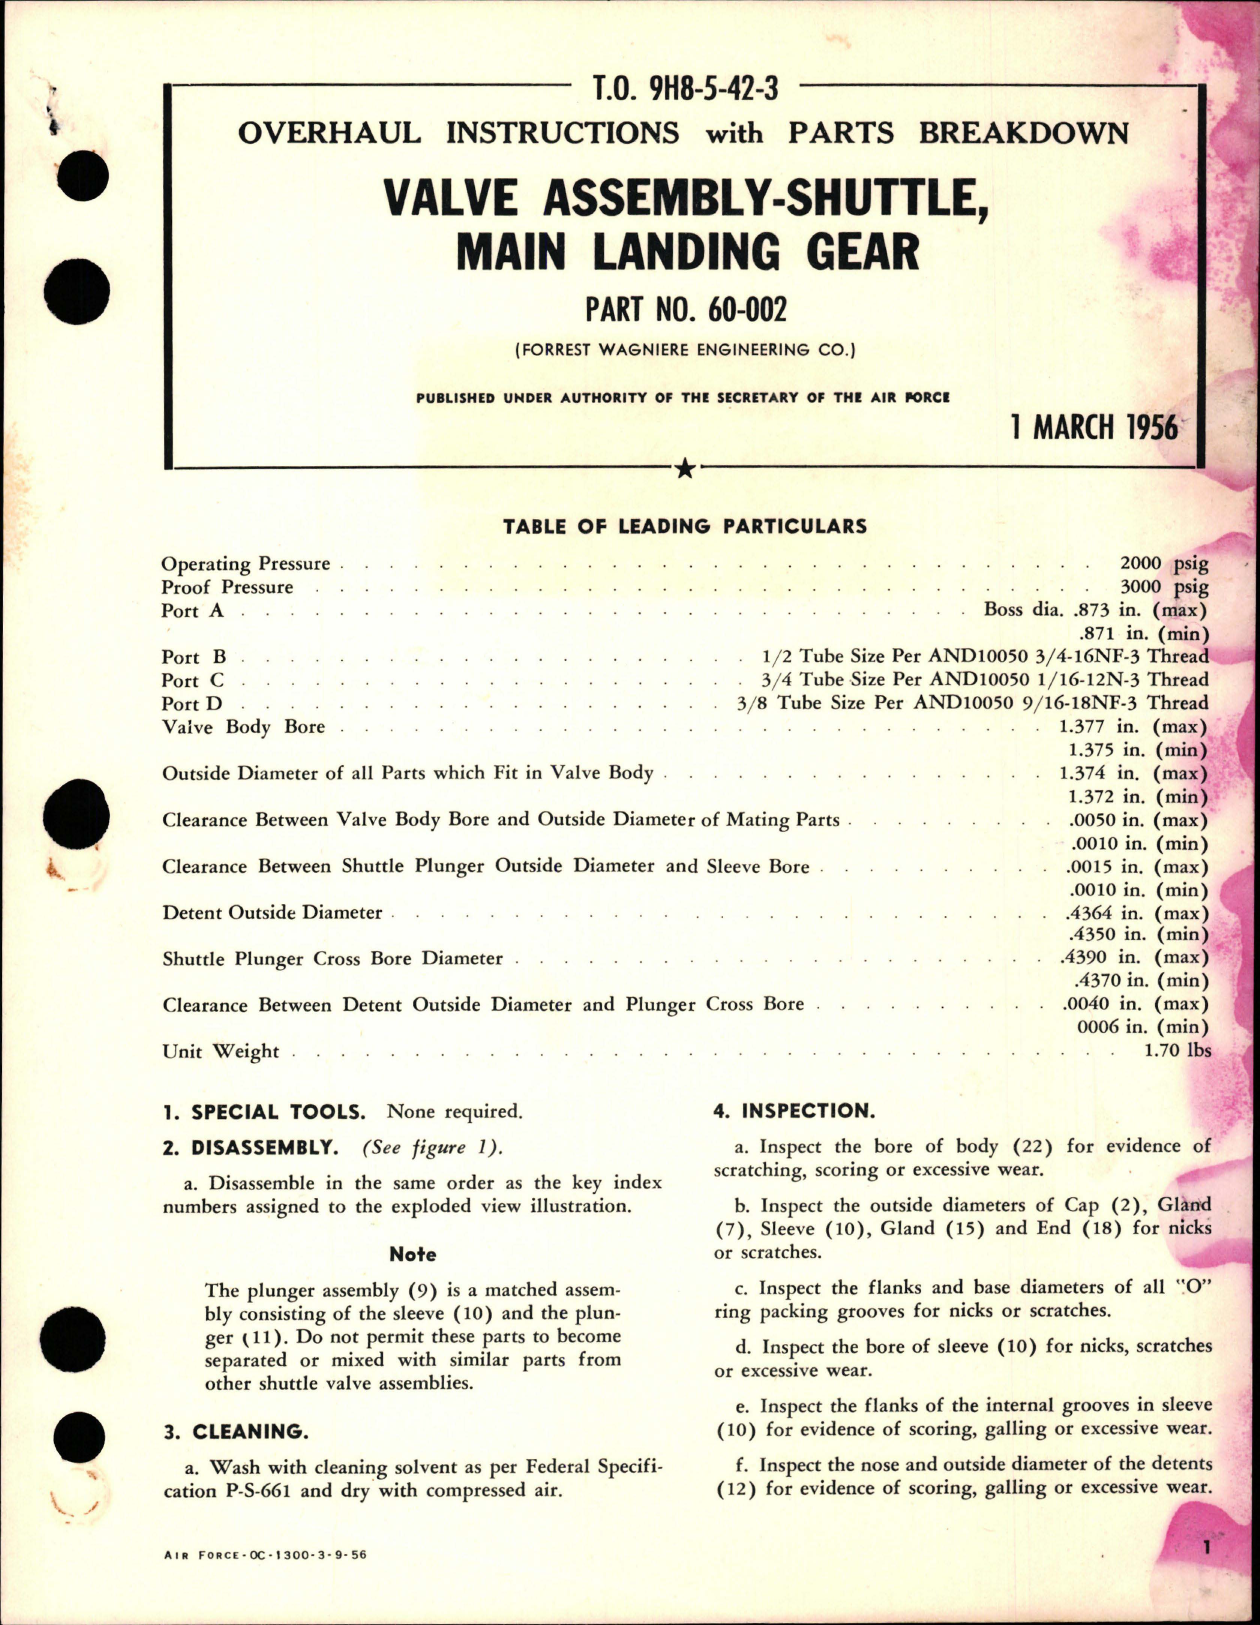 Sample page 1 from AirCorps Library document: Overhaul Instructions with Parts Breakdown for Main Landing Gear Shuttle Valve Assembly - Part 60-002 